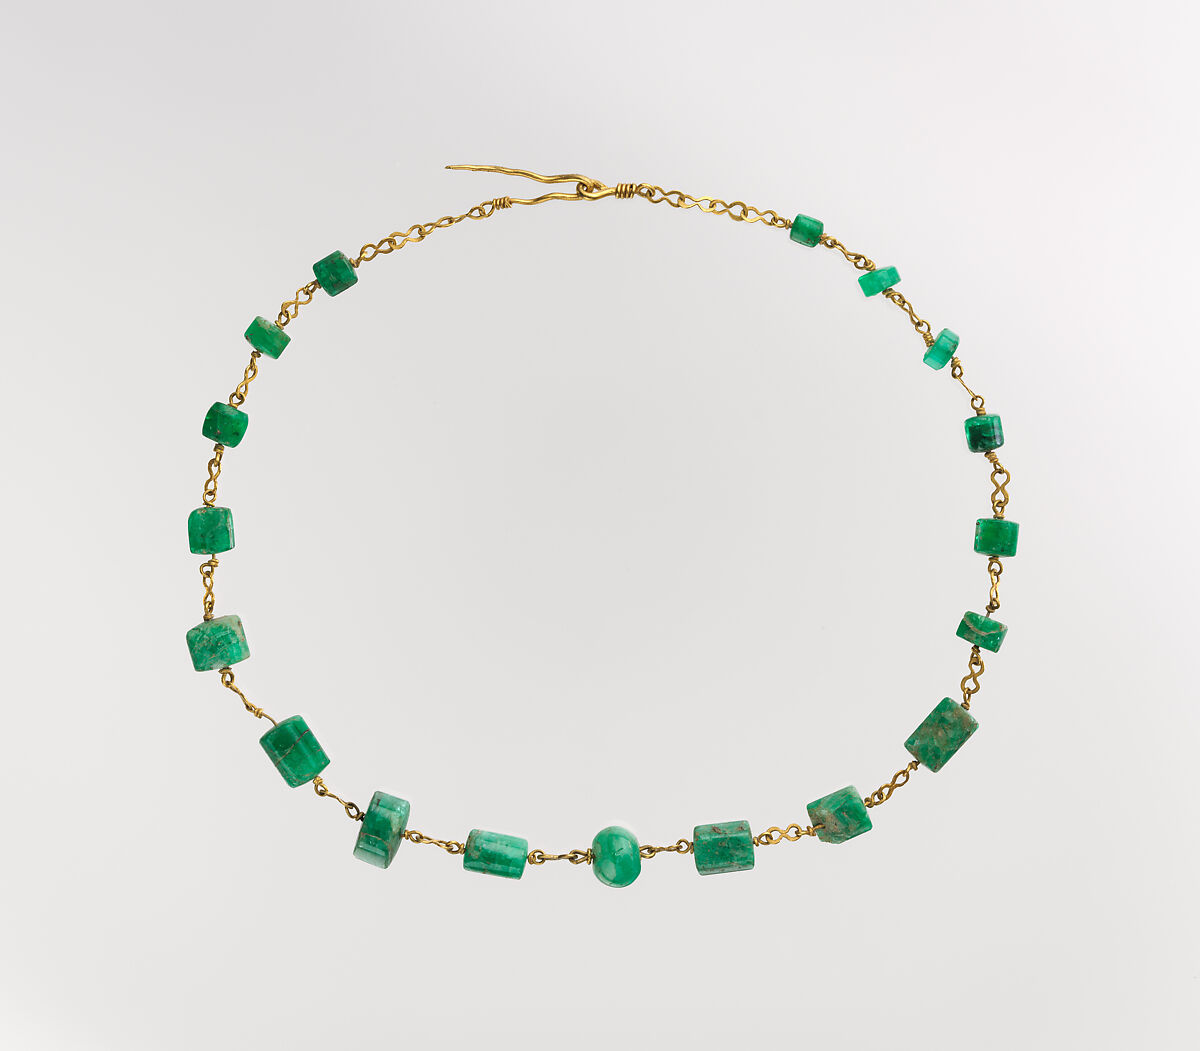 Gold and emerald necklace, Gold, emerald, Roman 